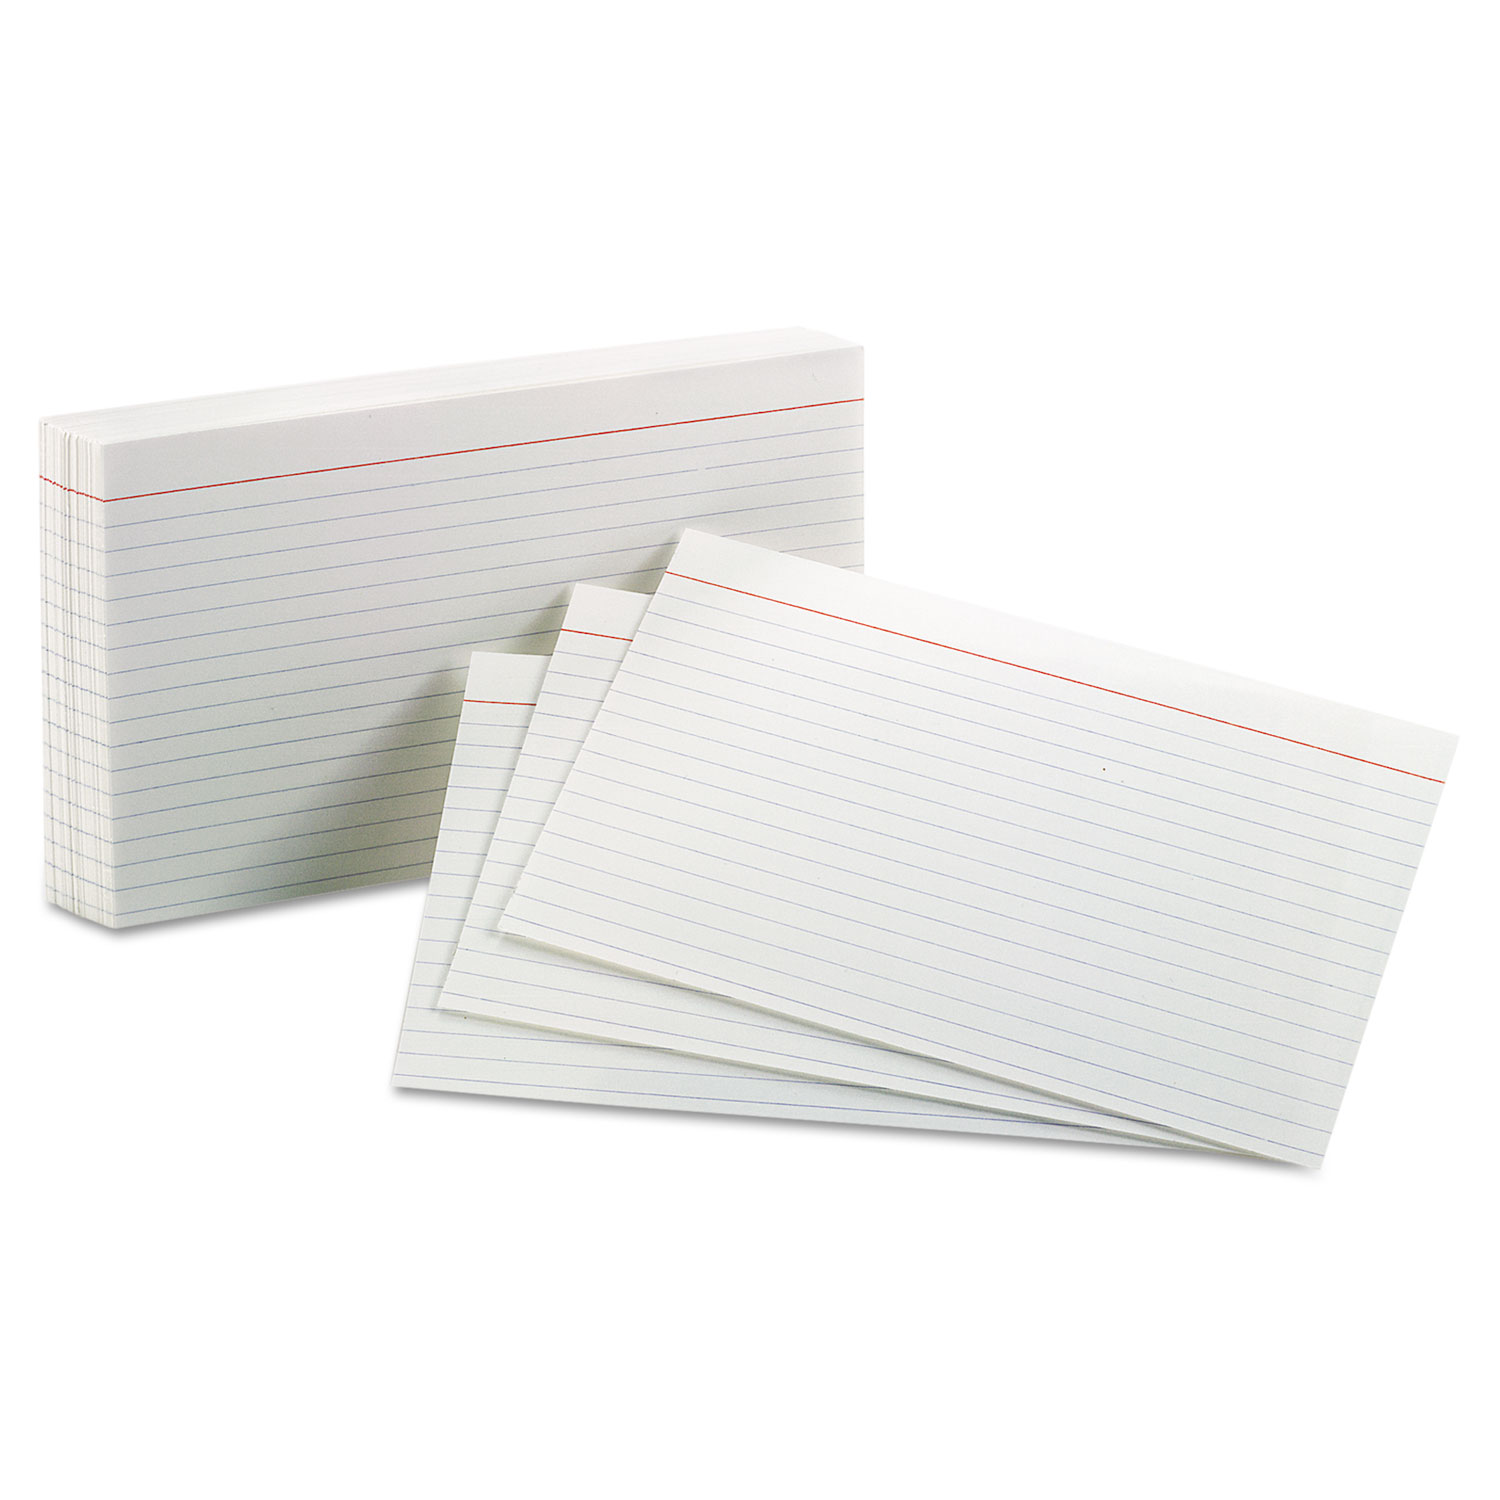 Pen+Gear Unruled Blank Index Cards, White, 100 Count, 4 x 6